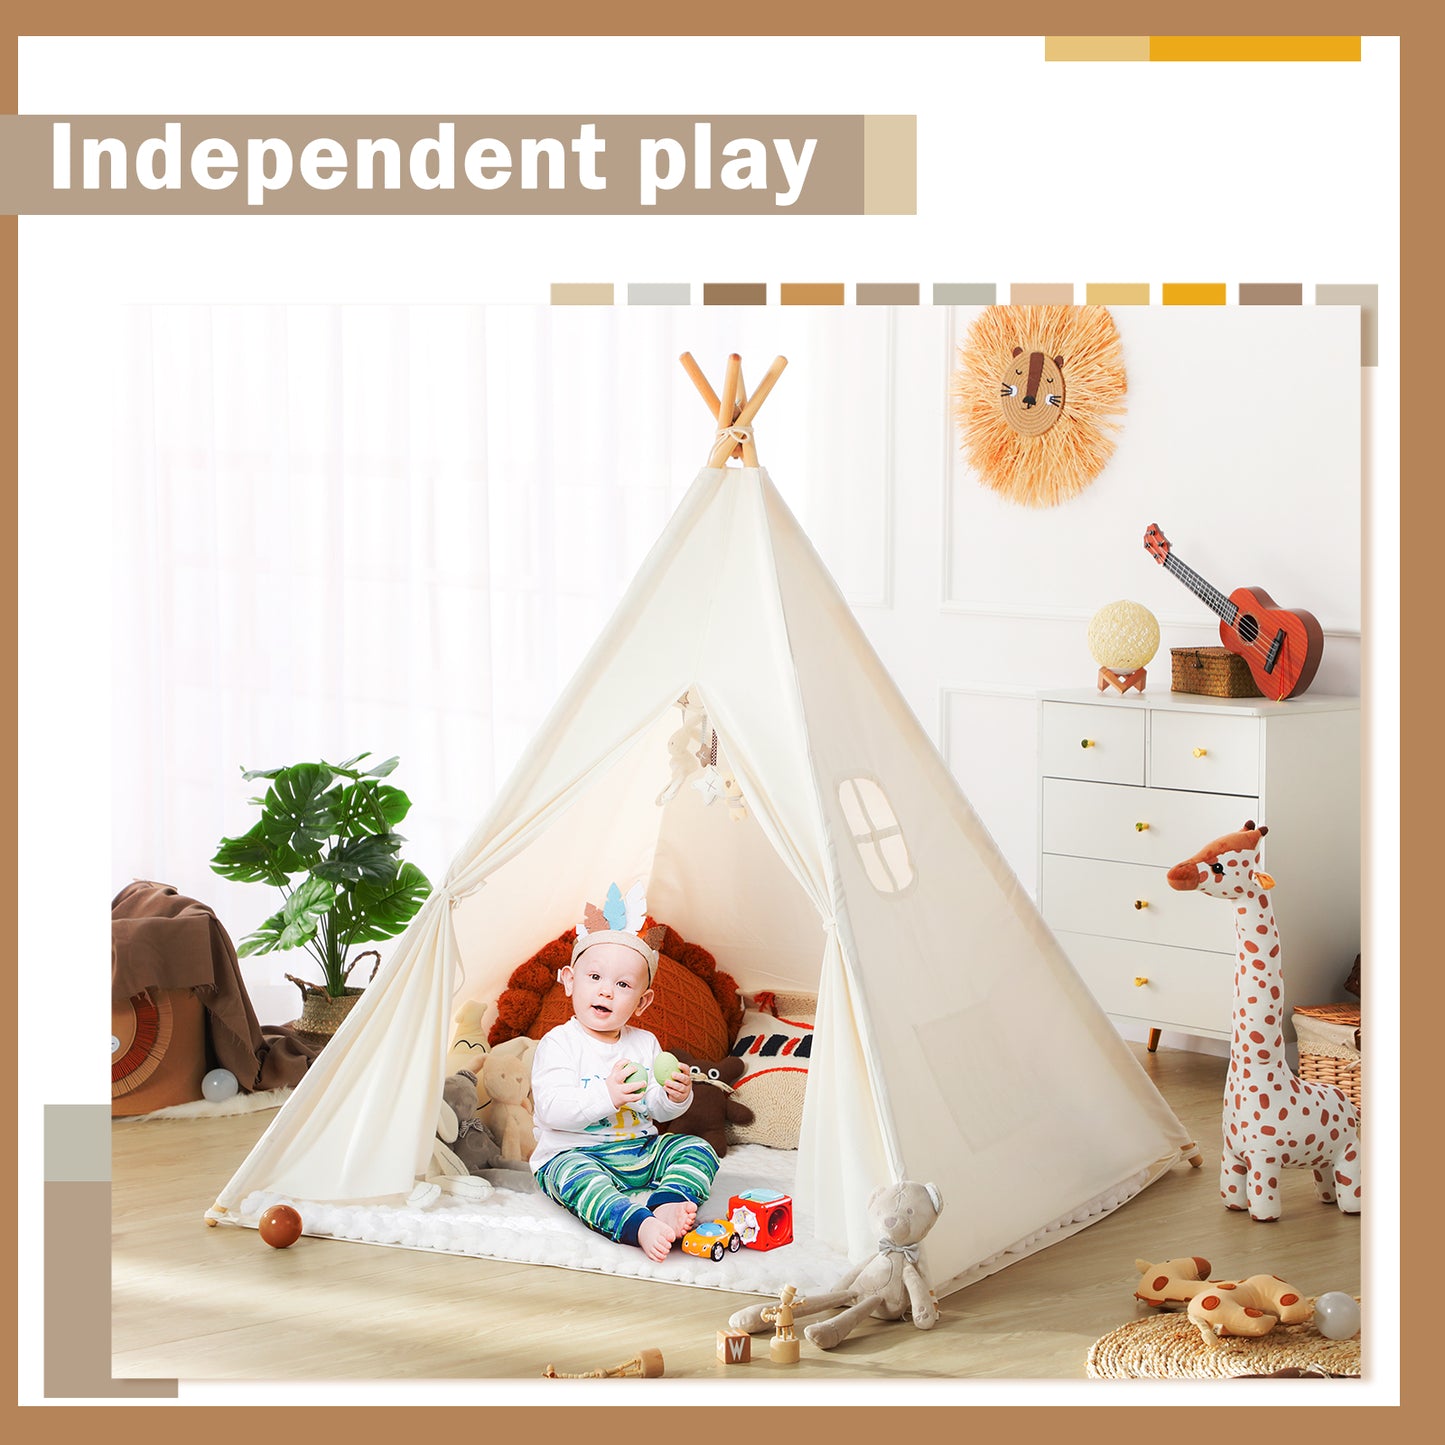 Wilwolfer Teepee Tent for Kids Foldable Children Play Tents for Girl and Boy with Carry Case(White)